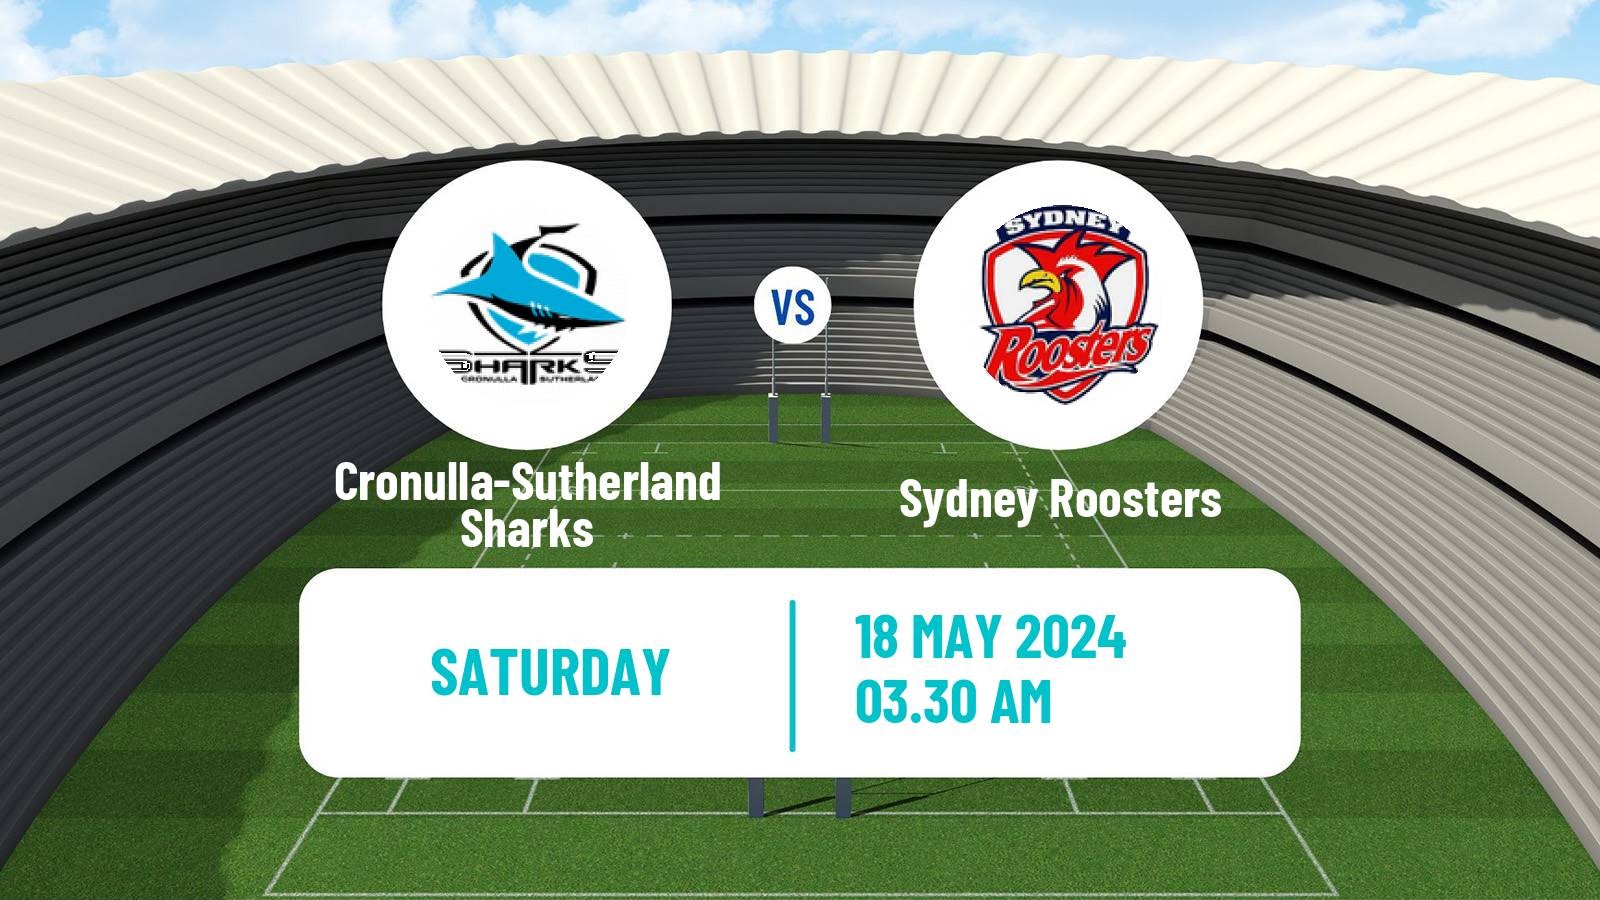 Rugby league Australian NRL Cronulla-Sutherland Sharks - Sydney Roosters